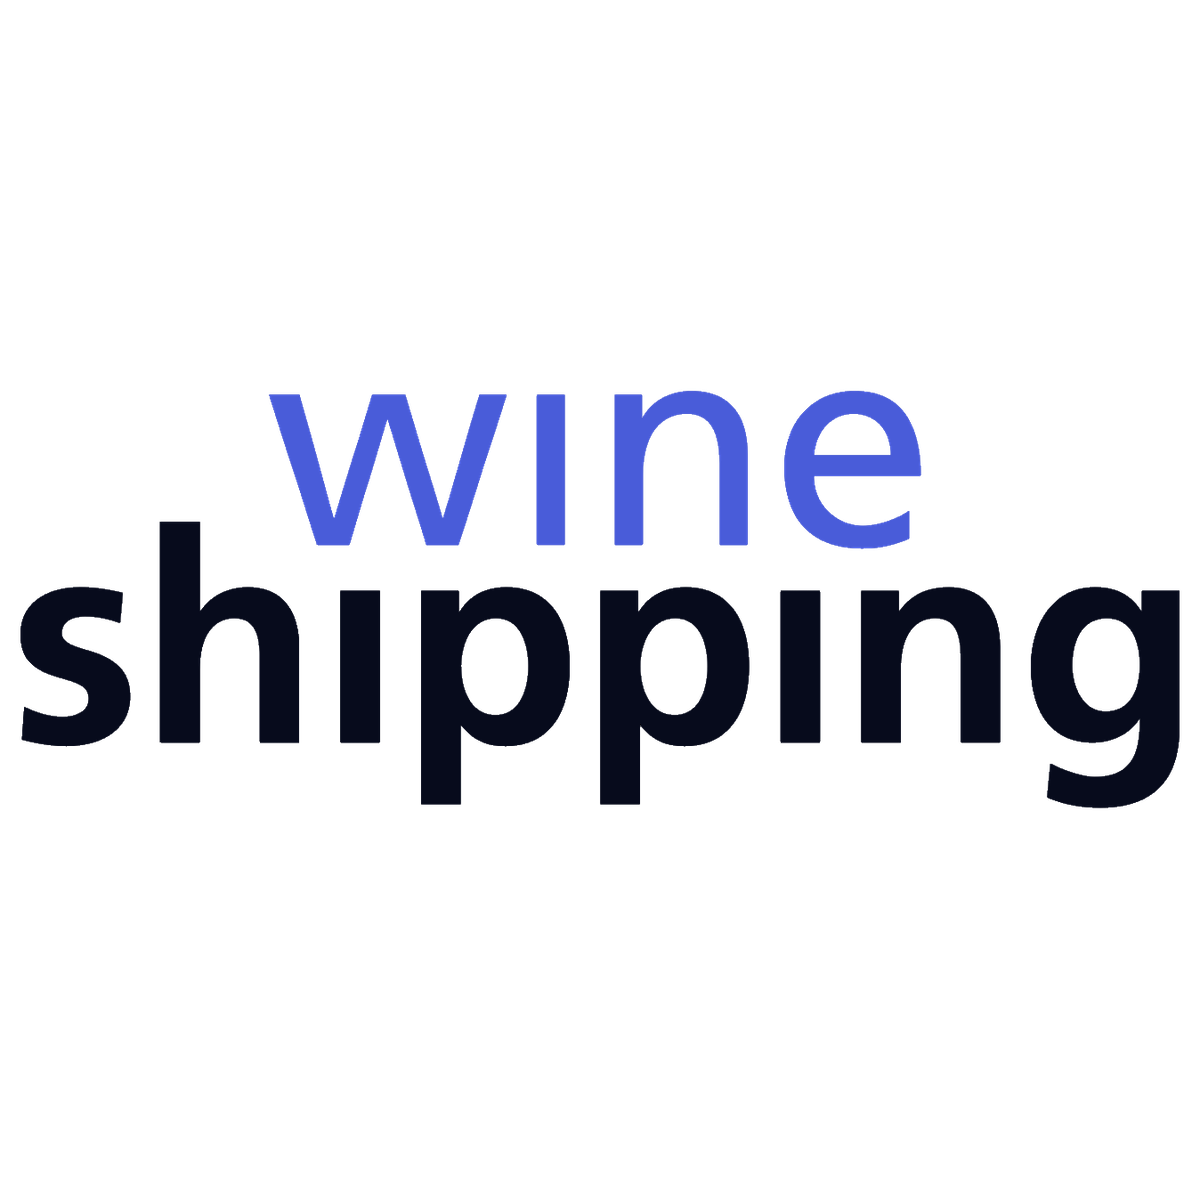 Hire Shopify Experts to integrate Wineshipping DTC app into a Shopify store